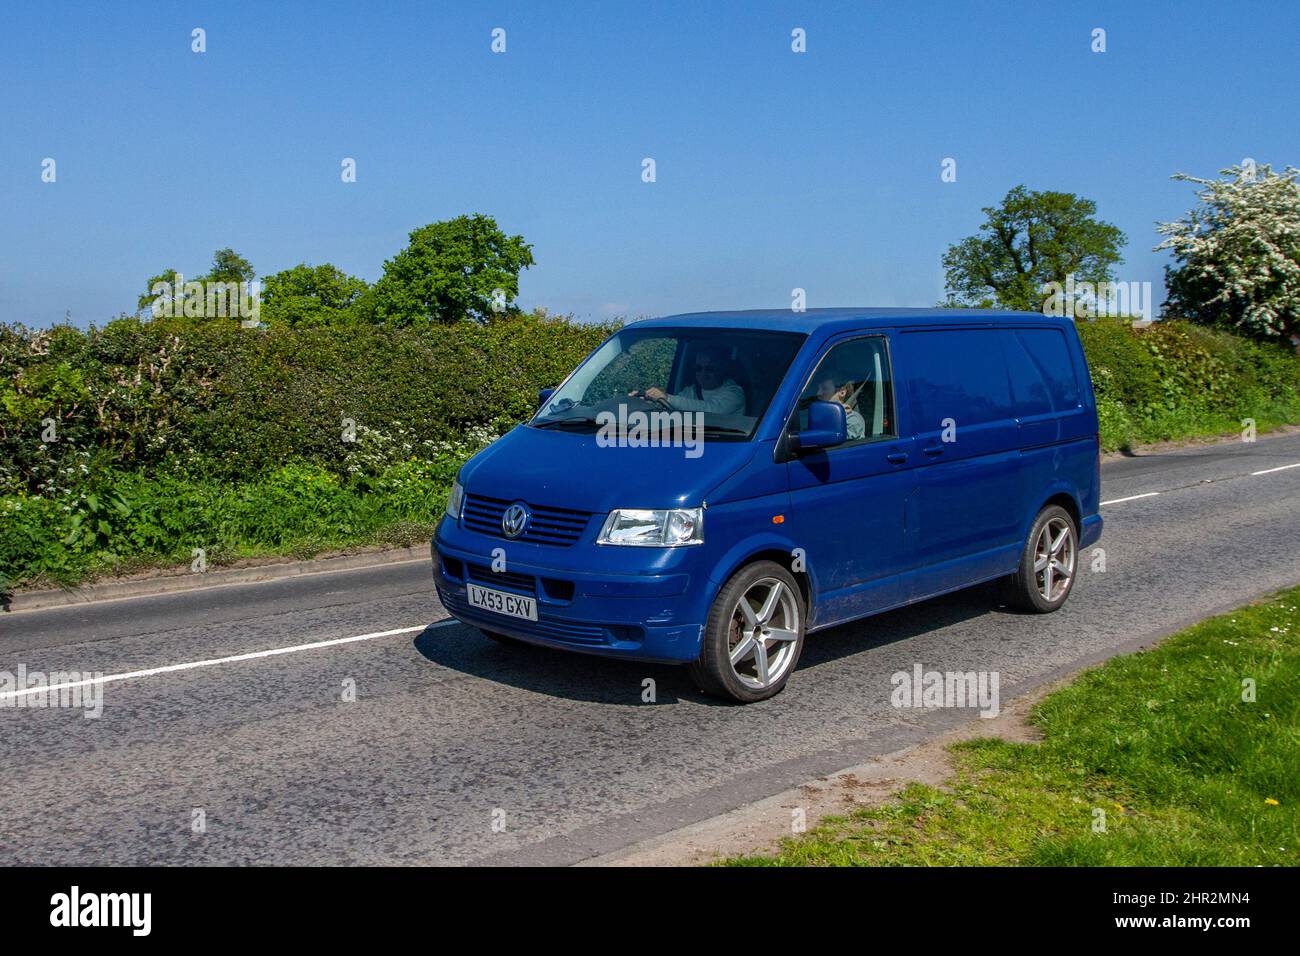 2003 blue VW Transporter 1.9SDI diesel Van; en-route to Capesthorne Hall classic May car show, Cheshire, UK Stock Photo